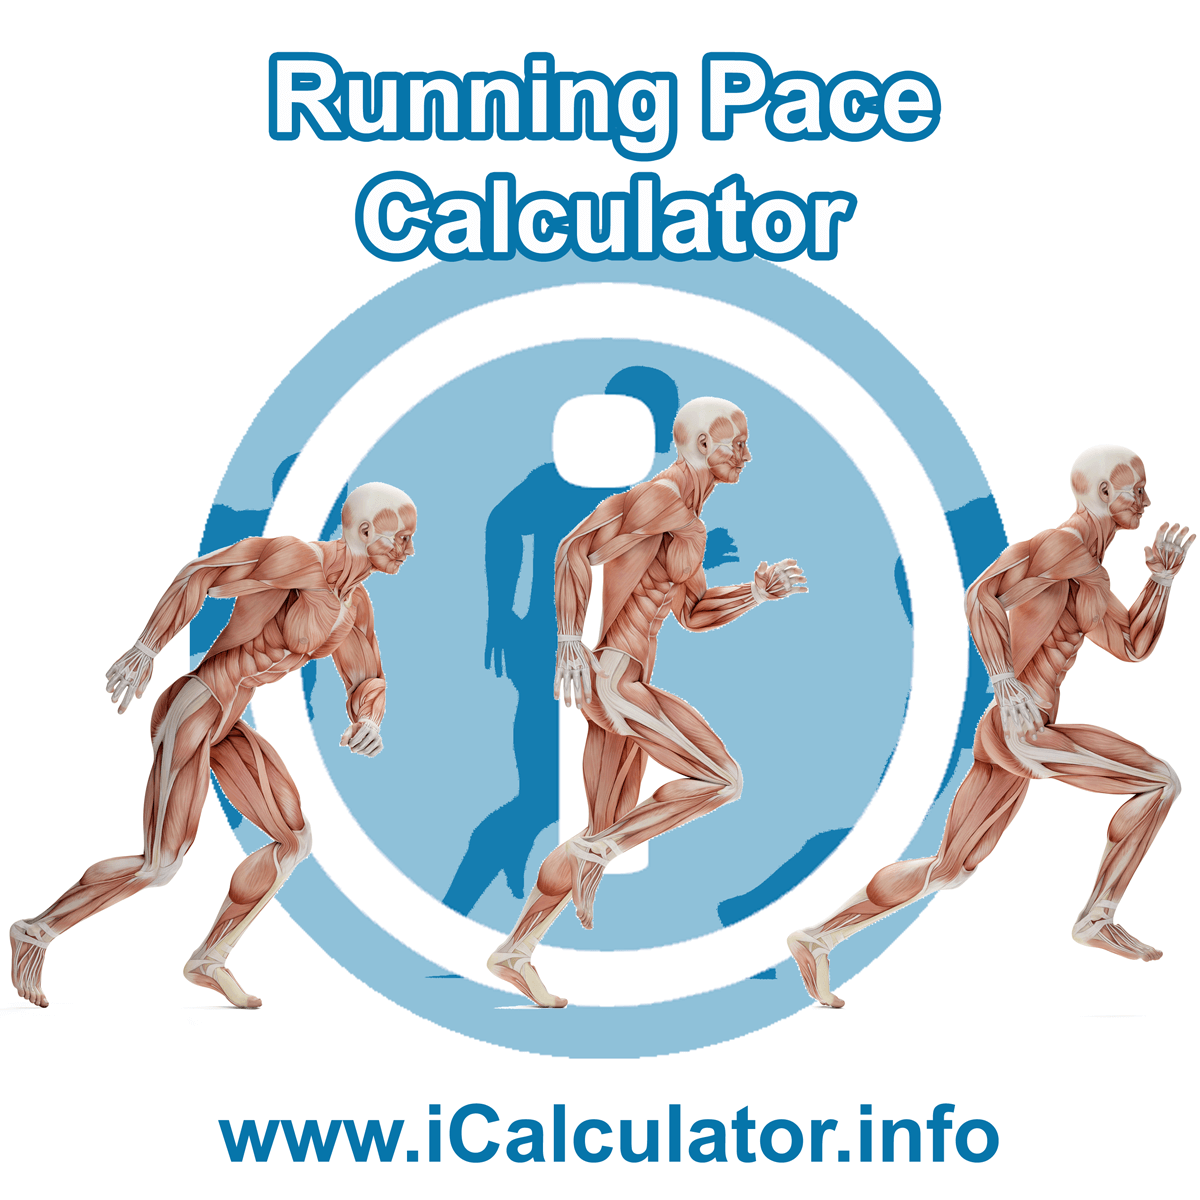 Use the Pace Calculator to create and manage a healthy running plan